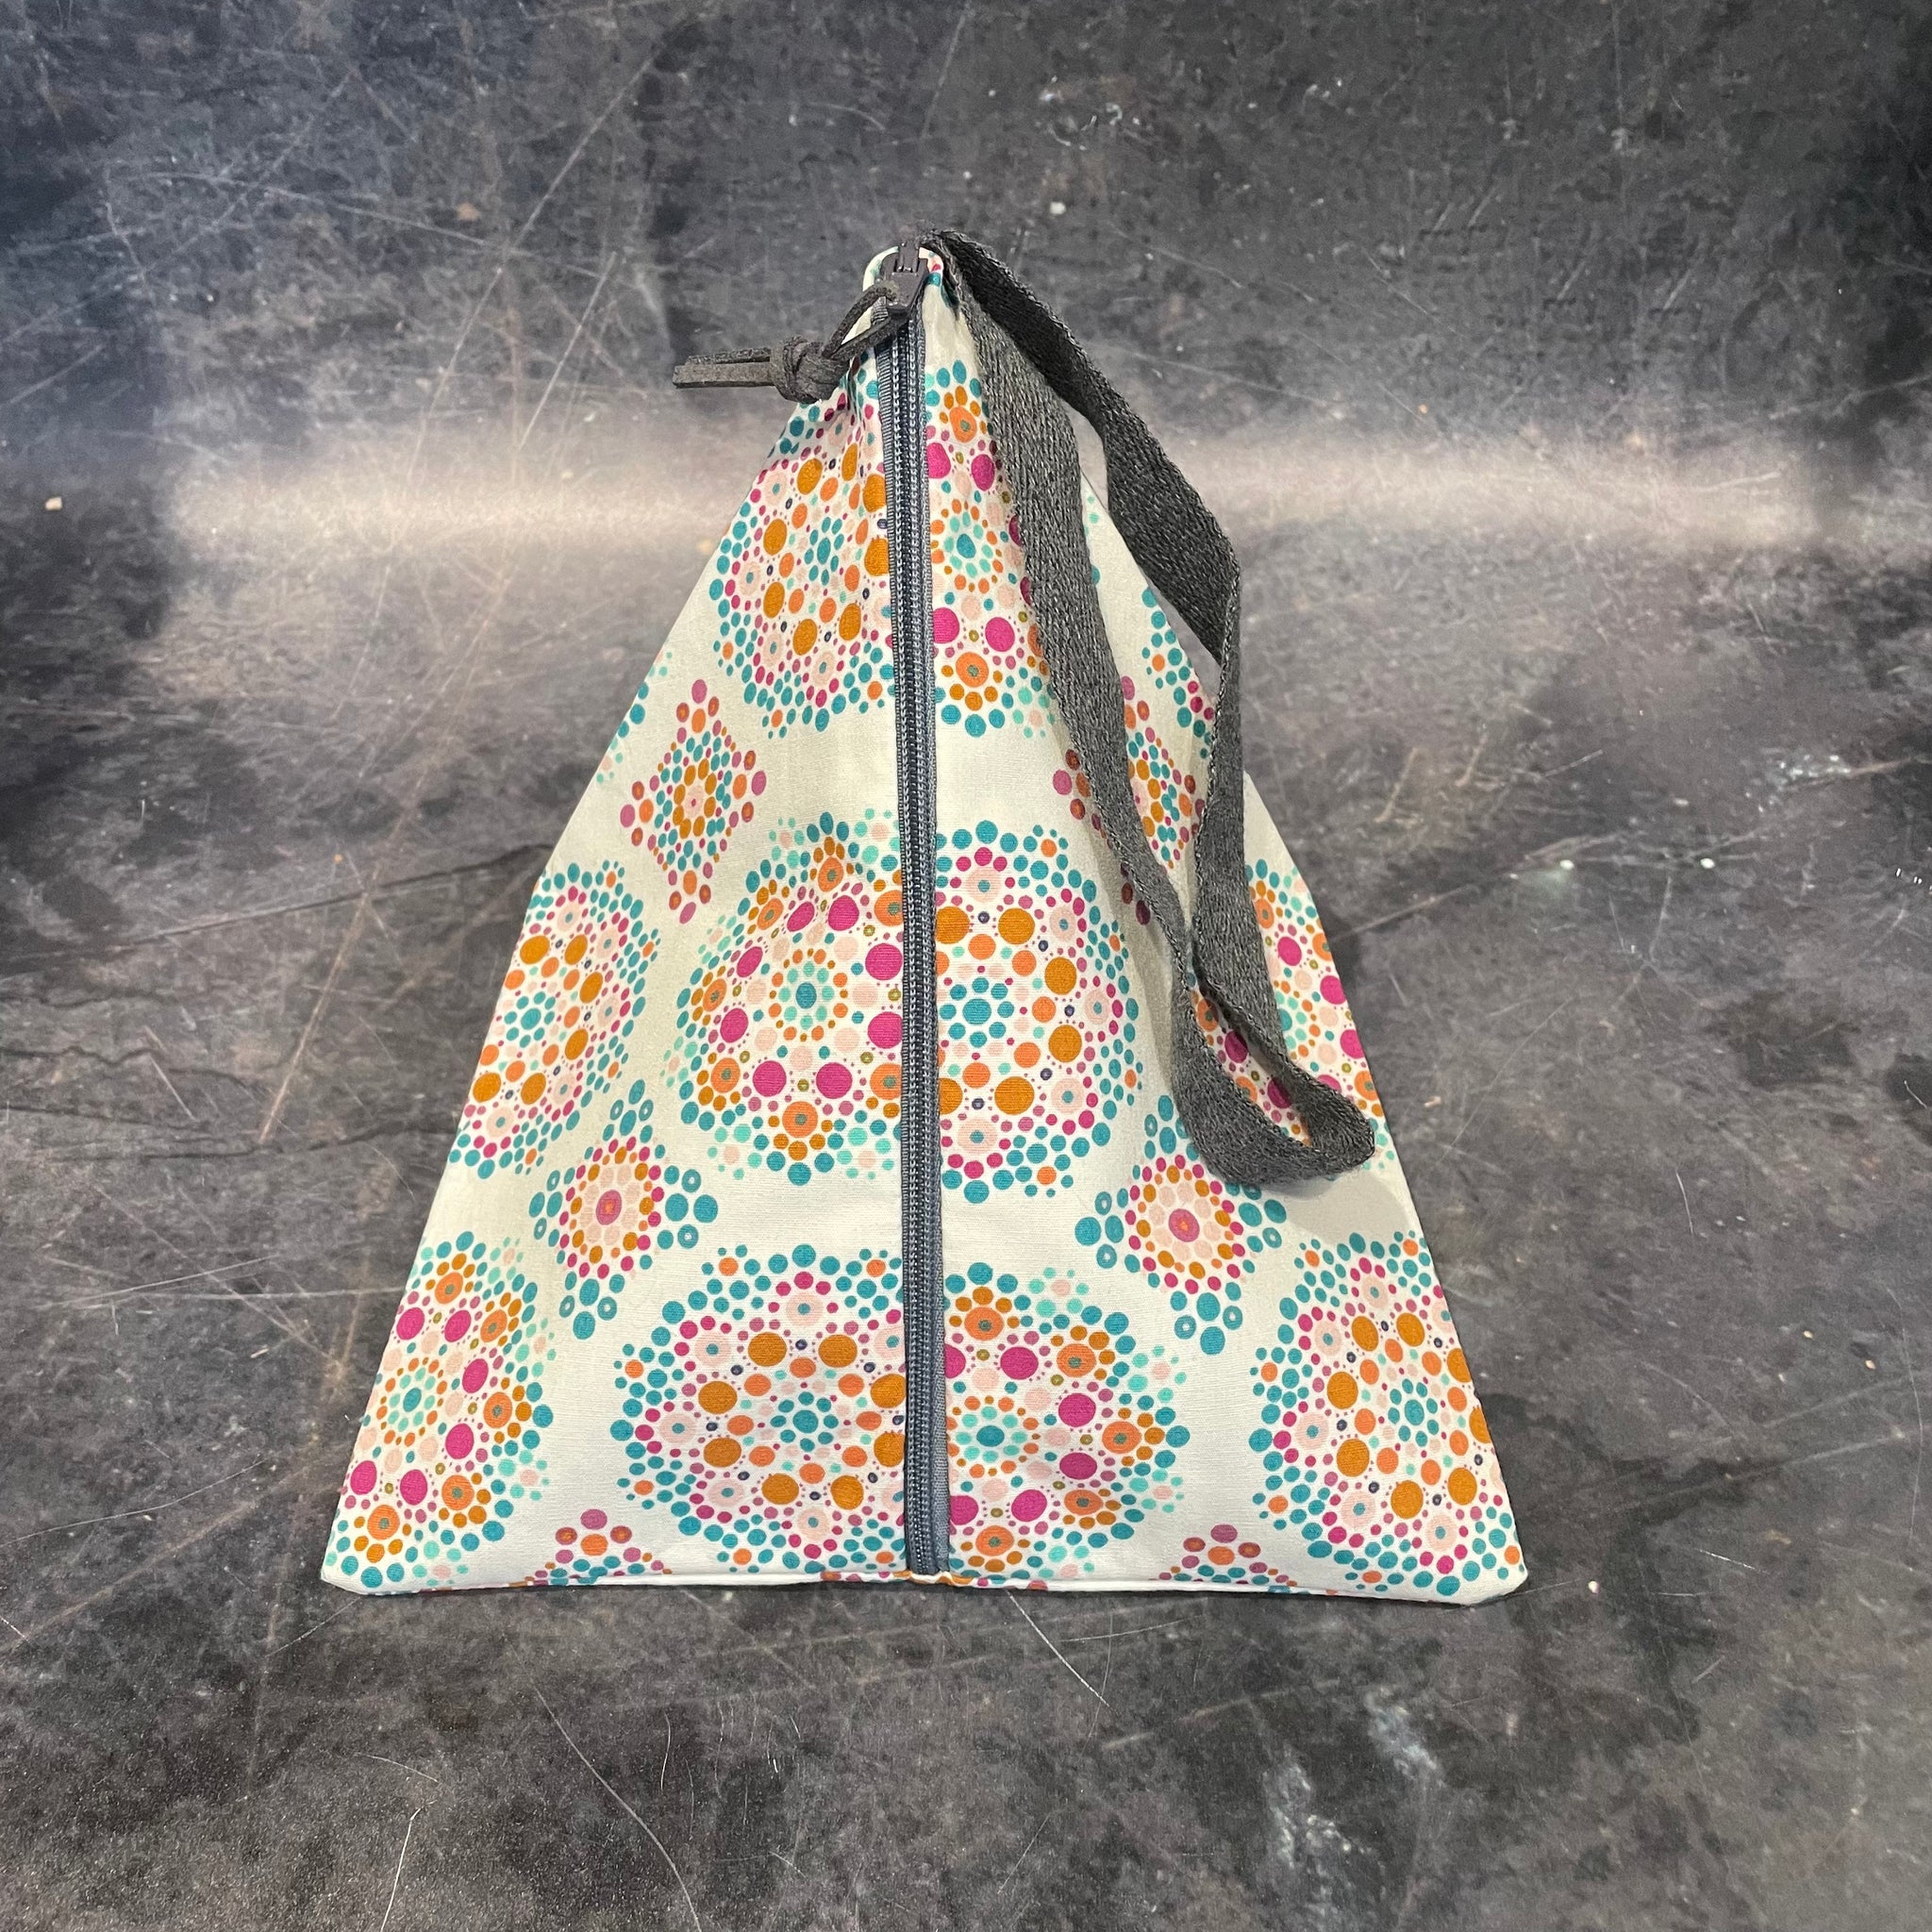 Pyramid Project Bags - End of Line fabric styles